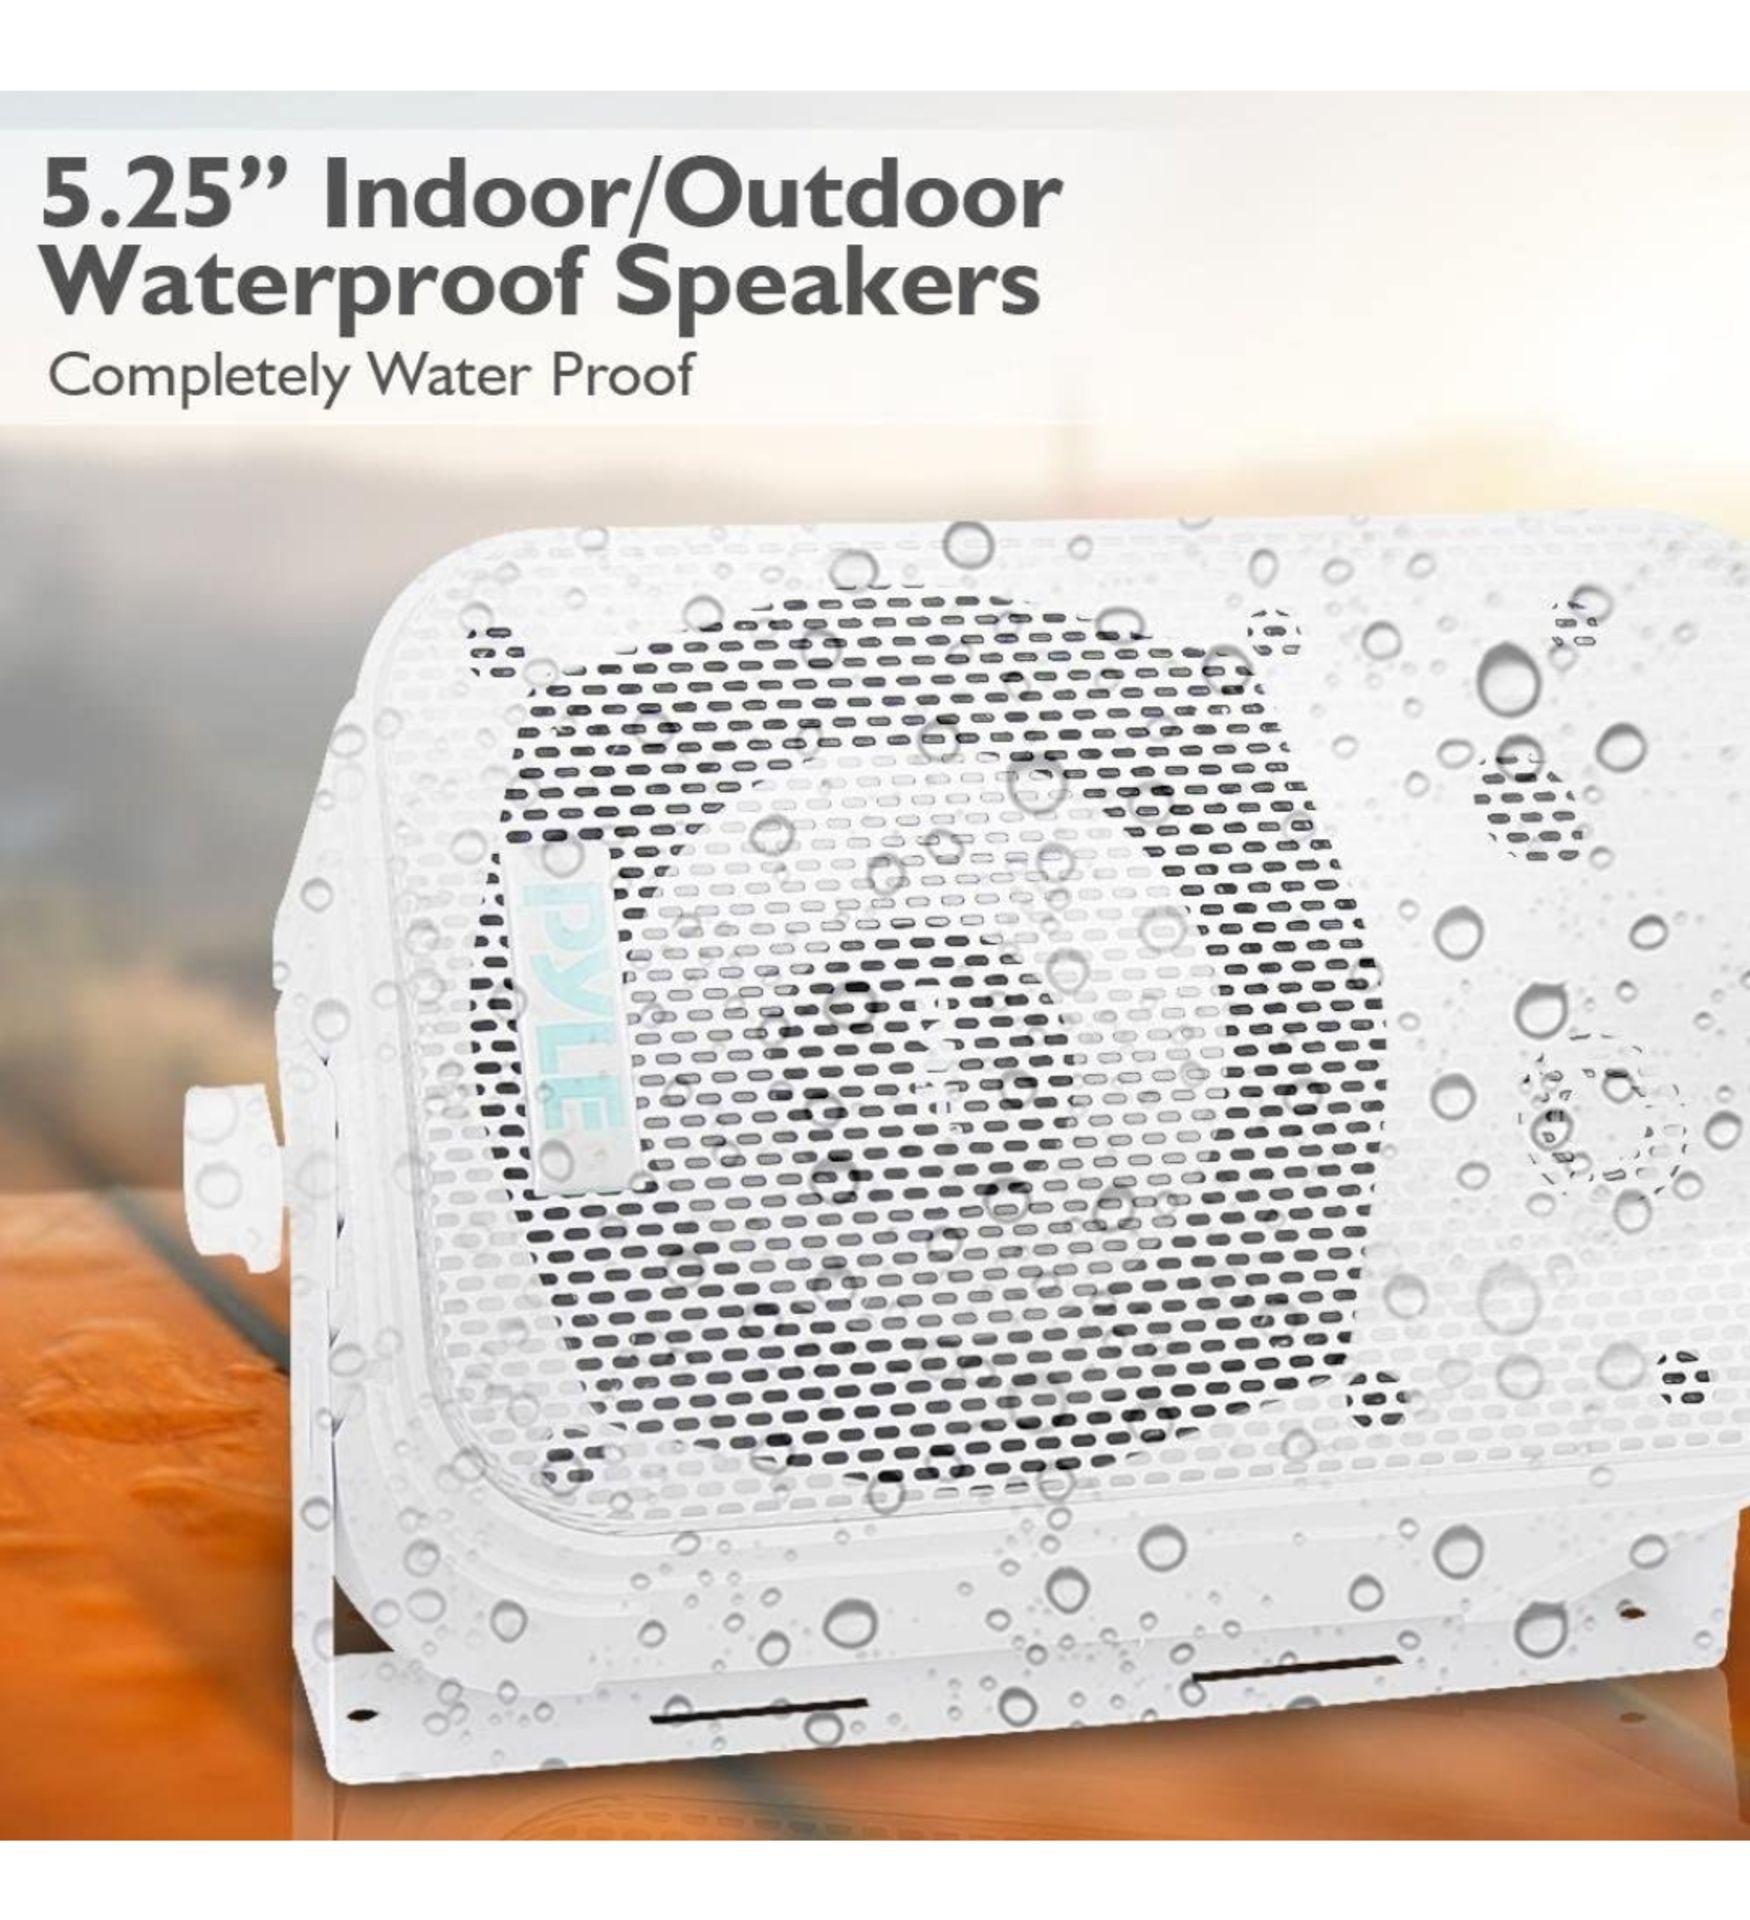 50 BOXES OF NEW PAIRS OF 2 X PYLE PDWR40W WATERPROOF OUTDOOR SPEAKERS RRP £1800 - Image 4 of 8